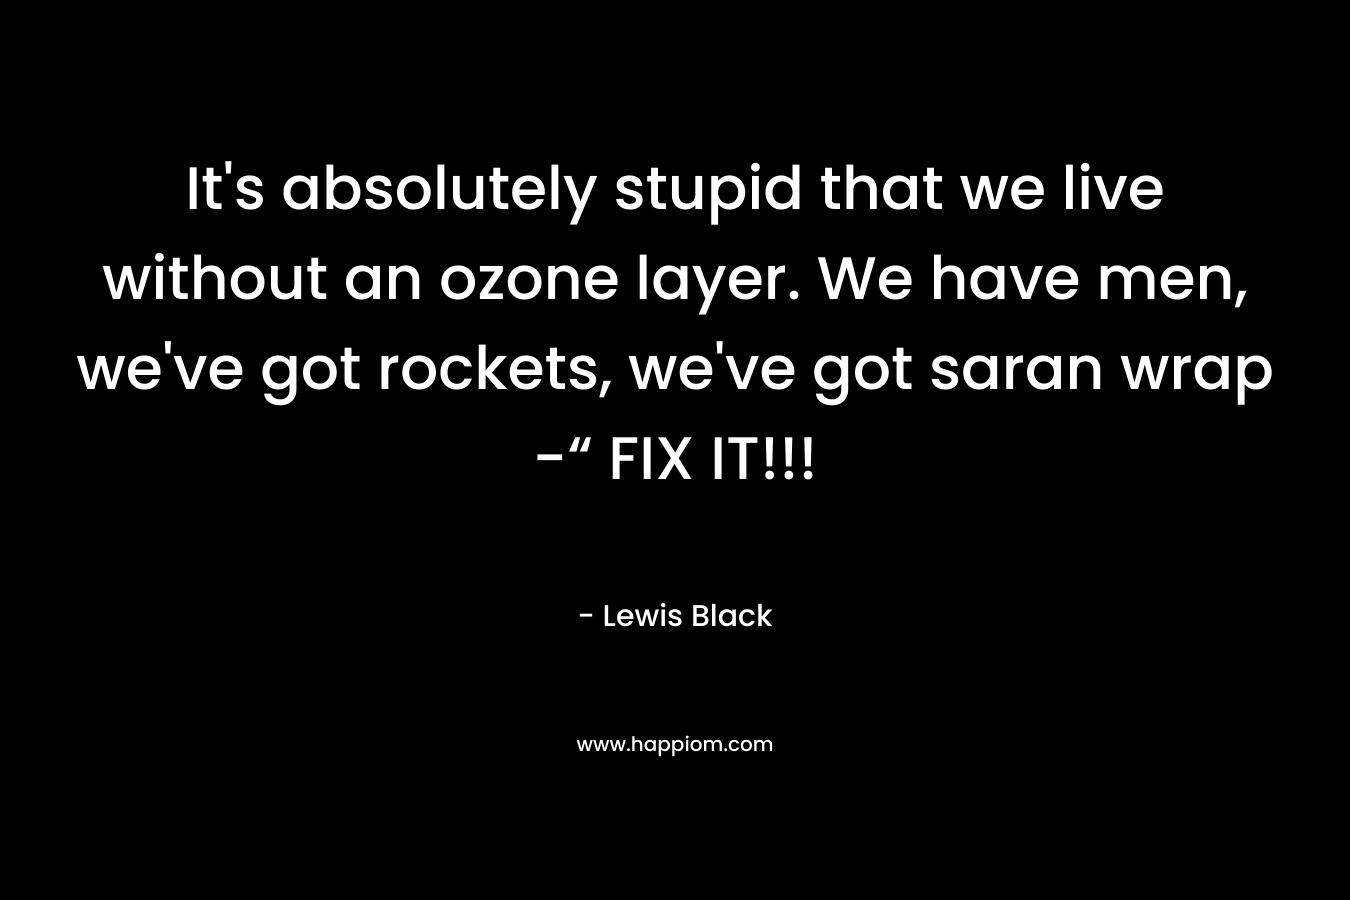 It’s absolutely stupid that we live without an ozone layer. We have men, we’ve got rockets, we’ve got saran wrap -“ FIX IT!!! – Lewis Black